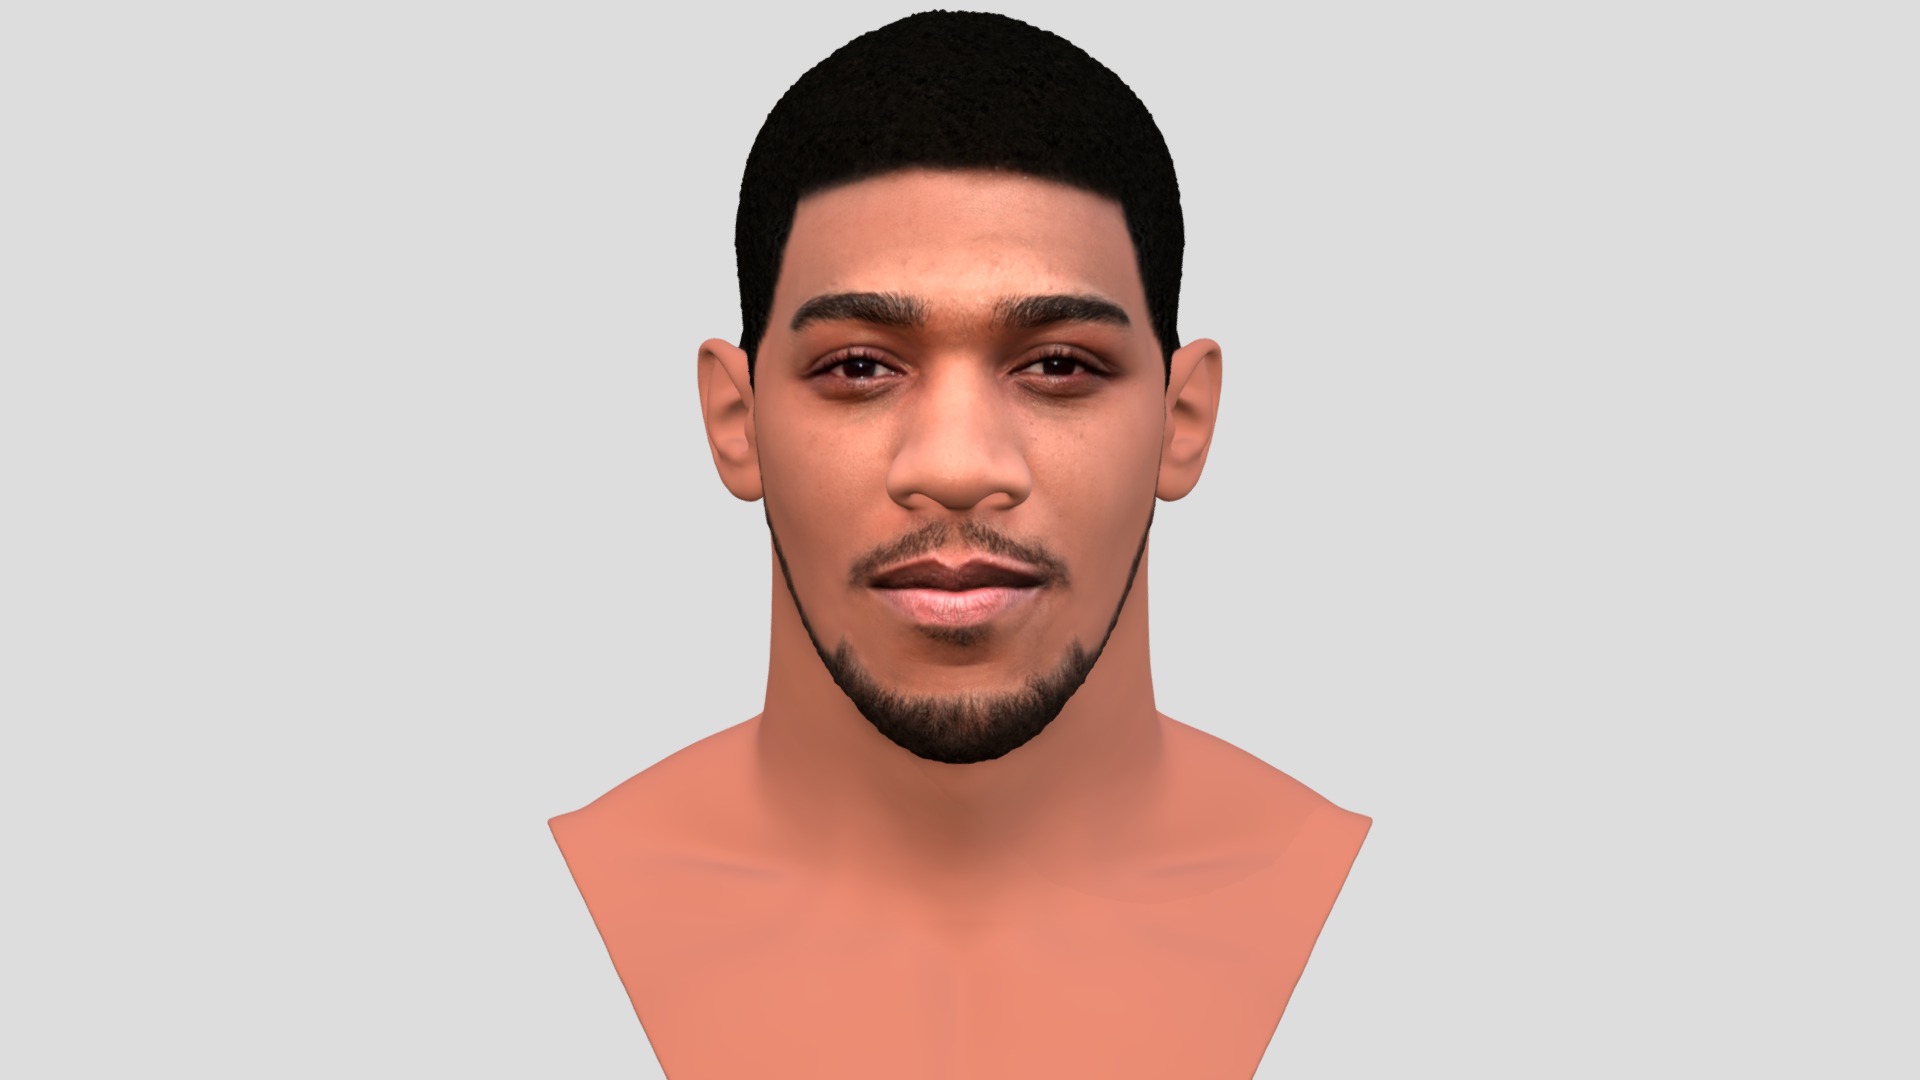 3D model Anthony Joshua bust for full color 3D printing - This is a 3D model of the Anthony Joshua bust for full color 3D printing. The 3D model is about a person with a beard.